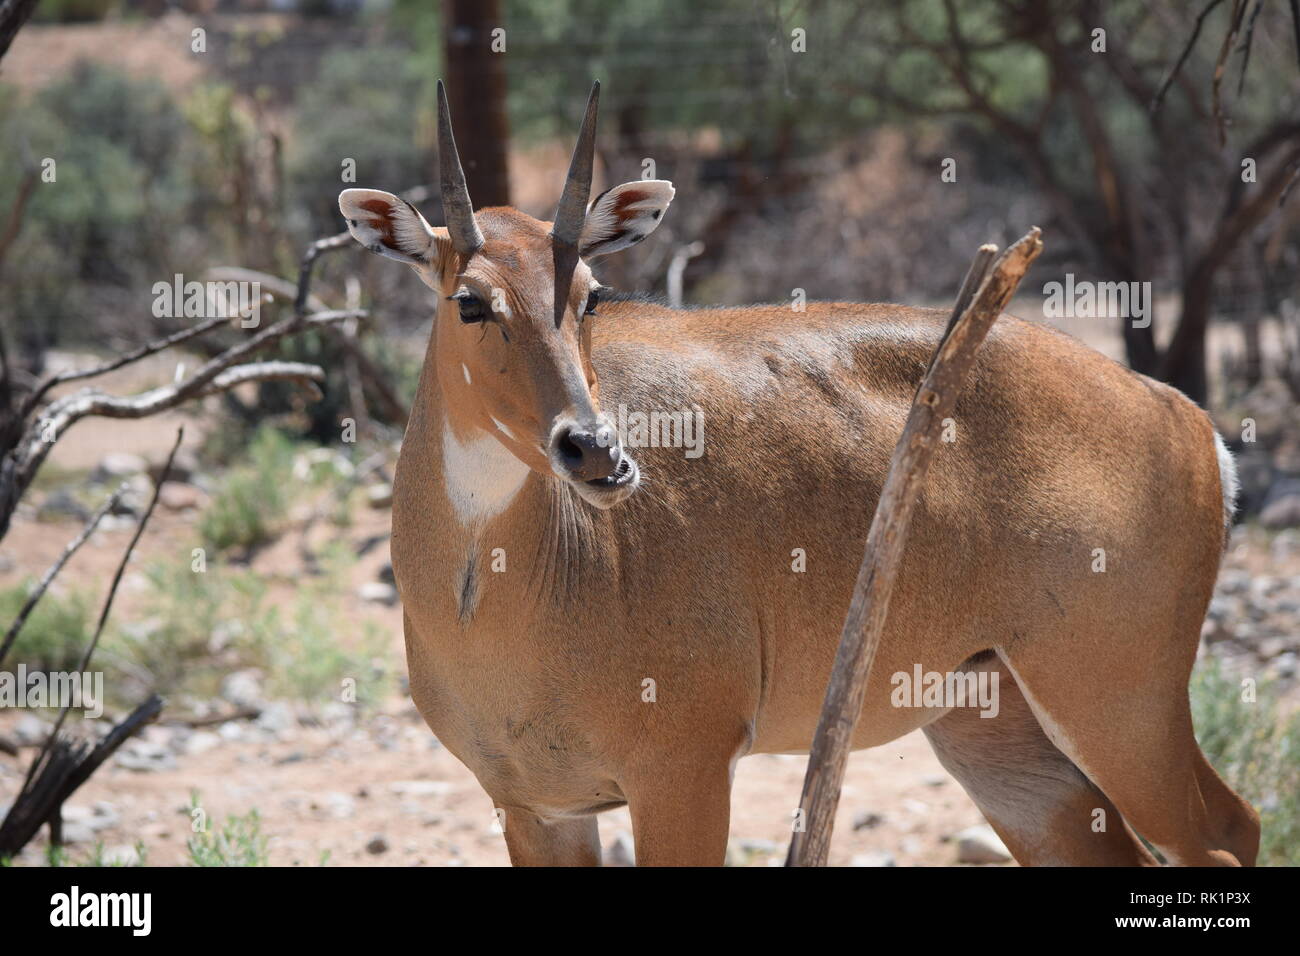 African deer at the Out of Africa sanctuary in Arizona Stock Photo